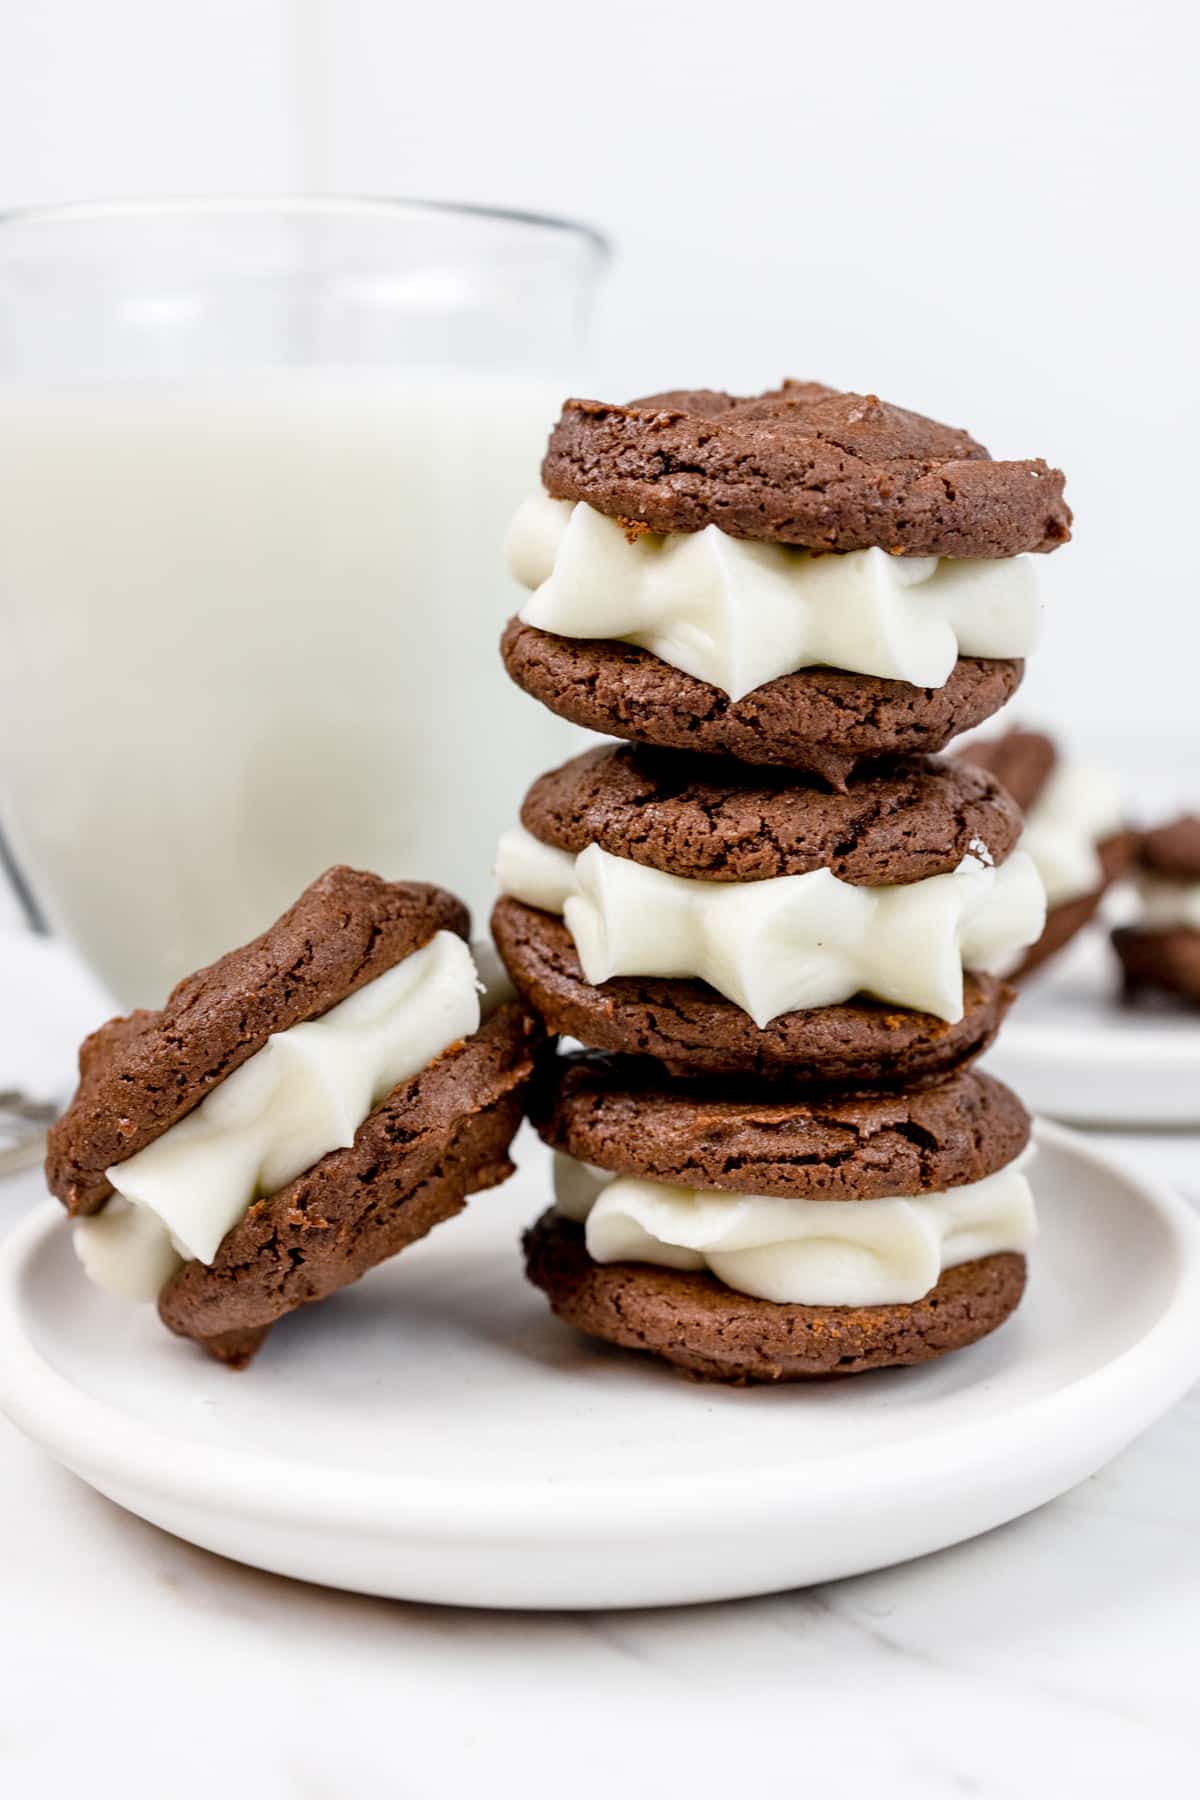 Hero image of a stack of Oreo Cakester cookies in a pile on a white plate.